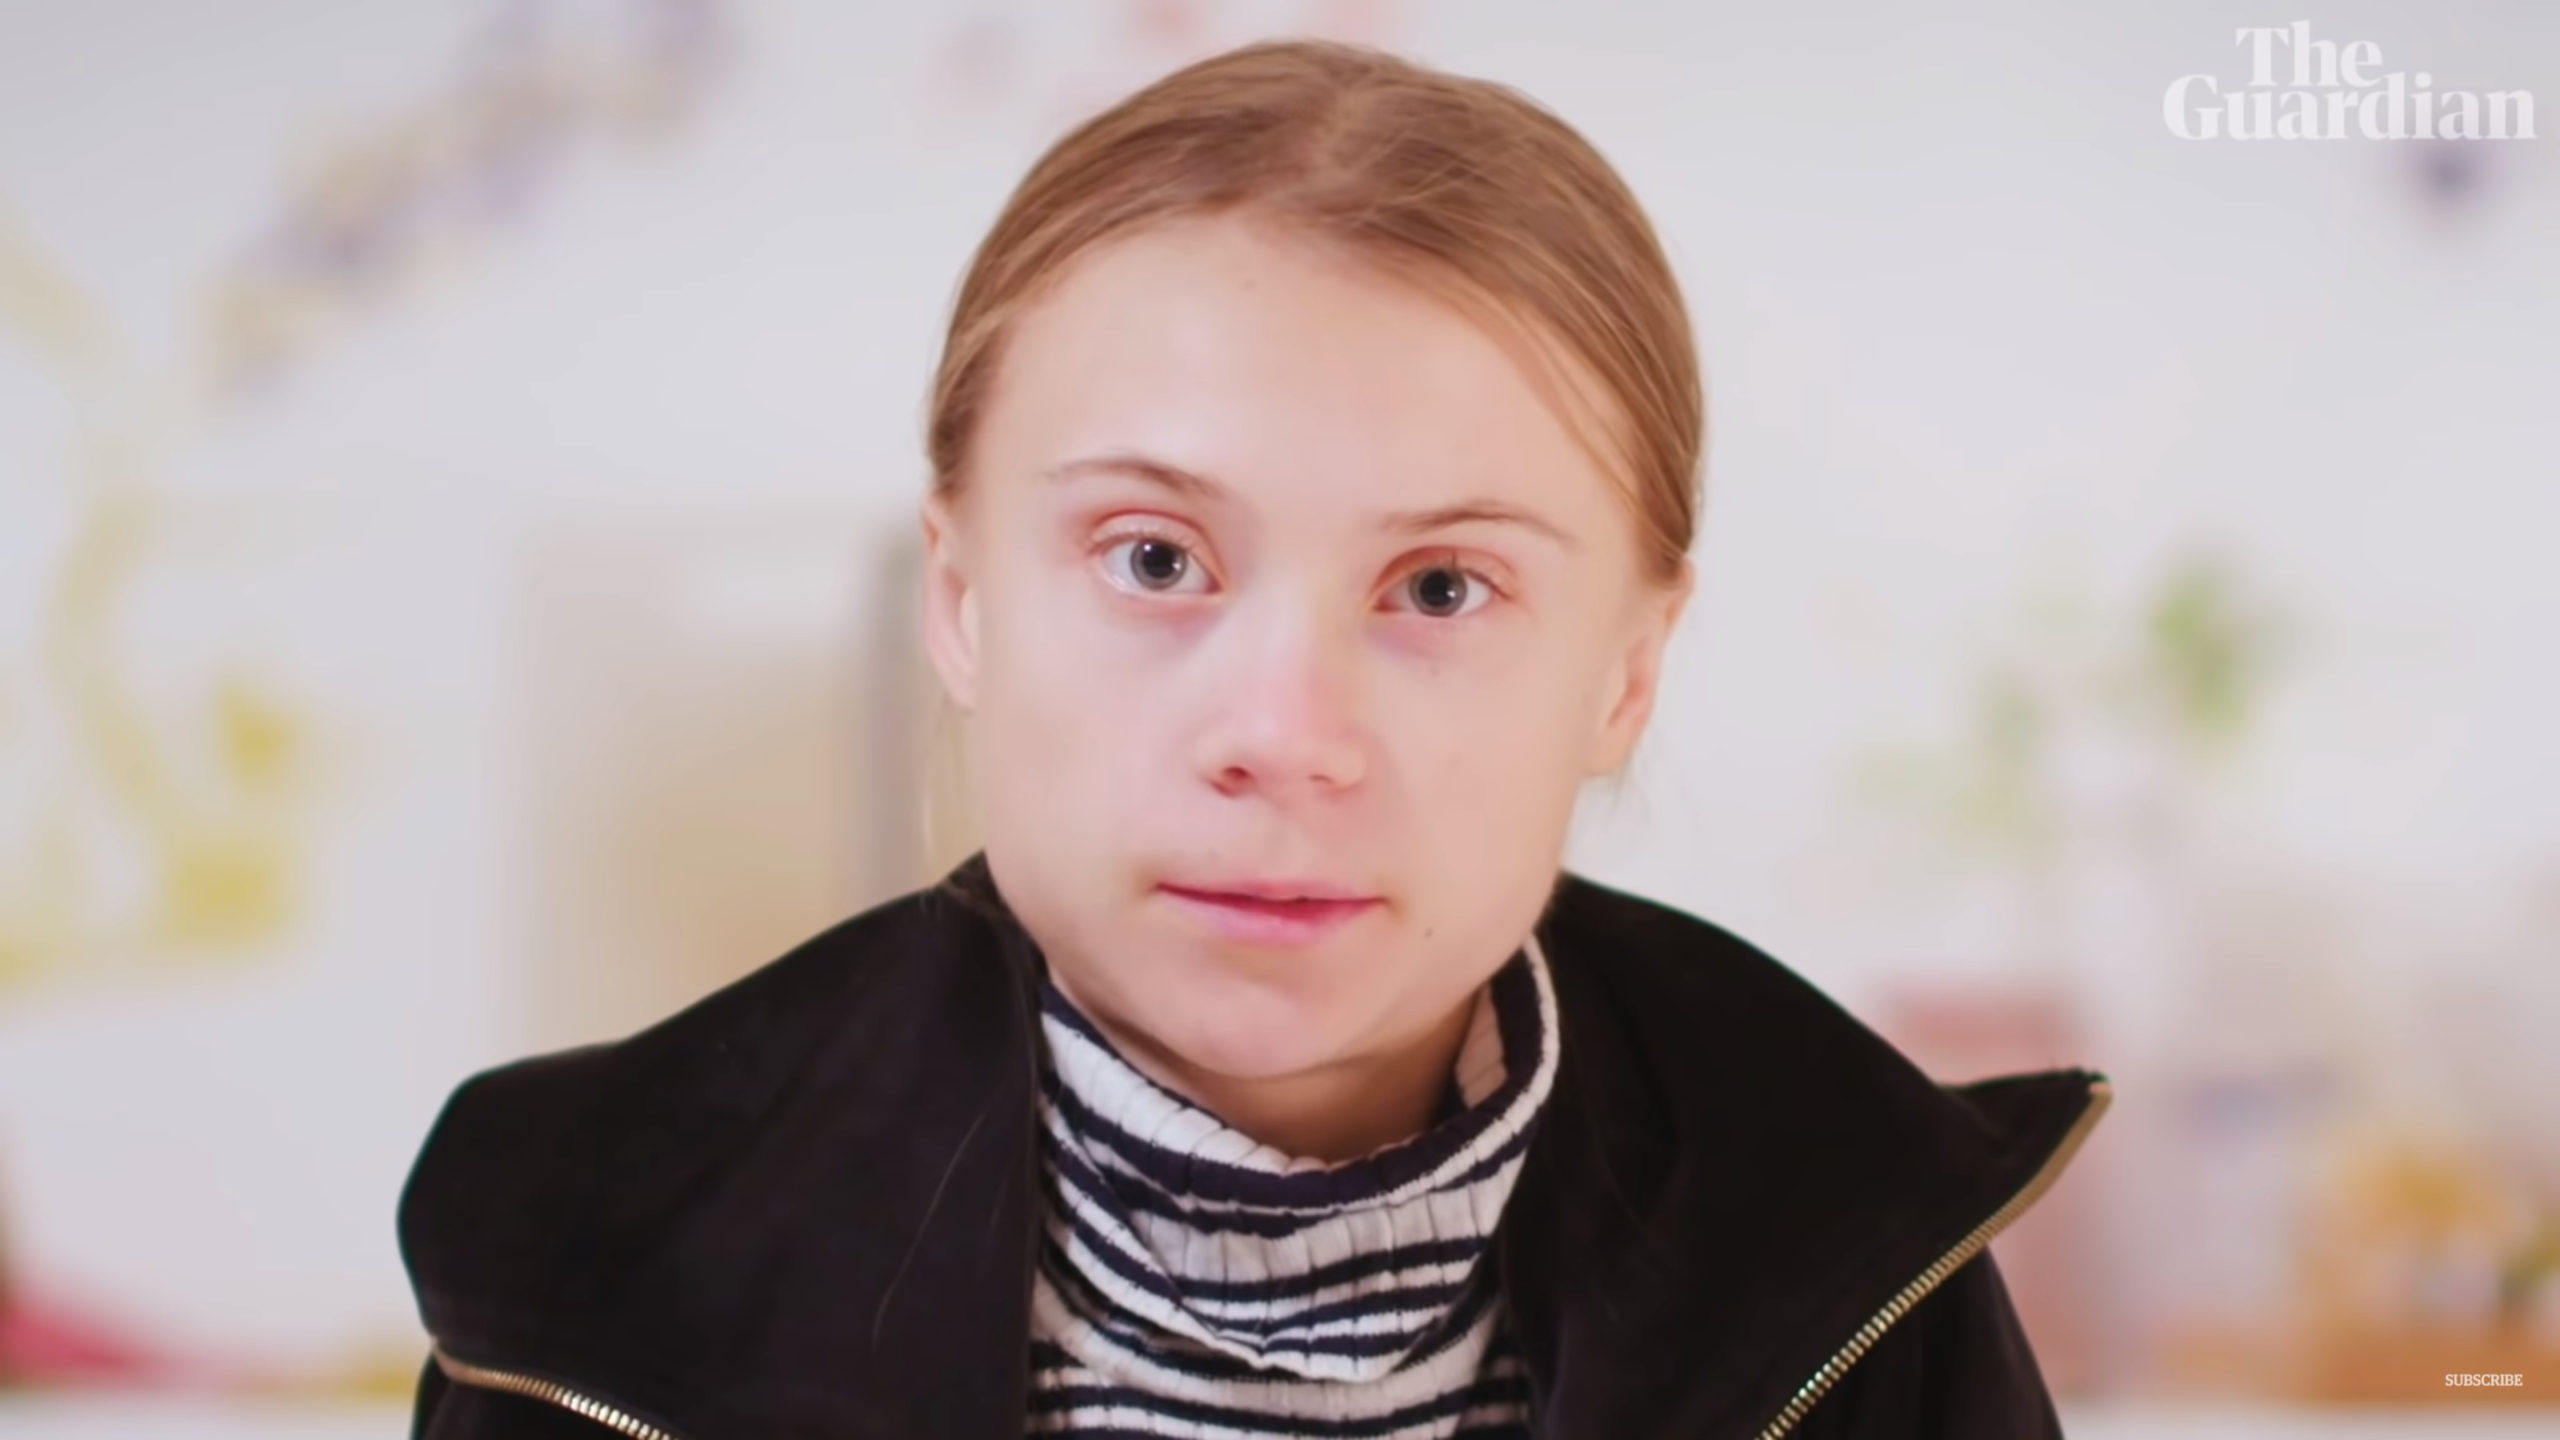 Screenshot from a video showing Greta Thunberg commenting on the world’s climate progress nearly five years after the Paris agreement, 10 December 2020. The world is in a ‘state of complete denial’. Photo: Guardian News